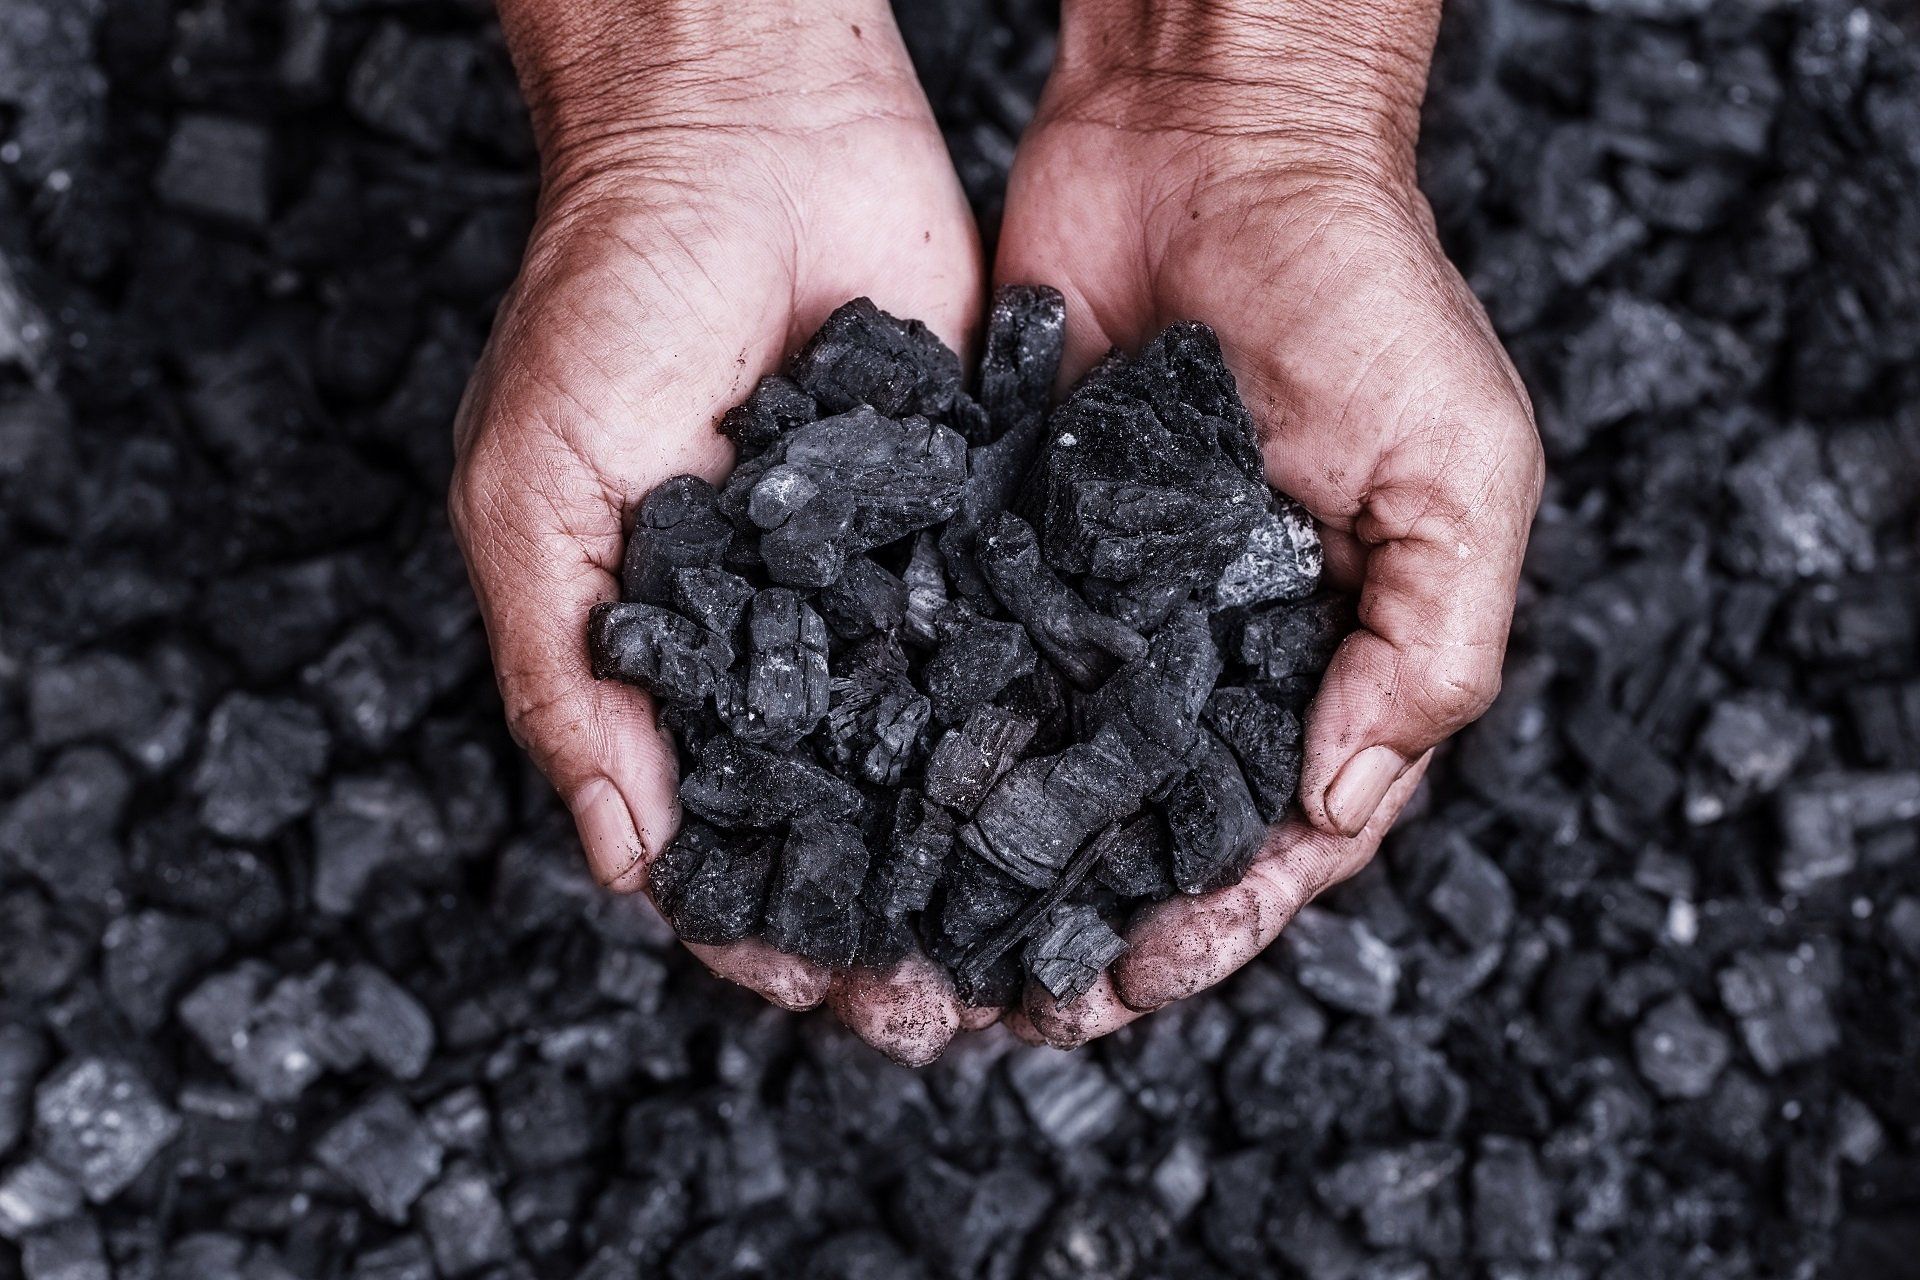 PermuTrade’s Satisfactory Petroleum Coke vs Coal: What’s the Difference?